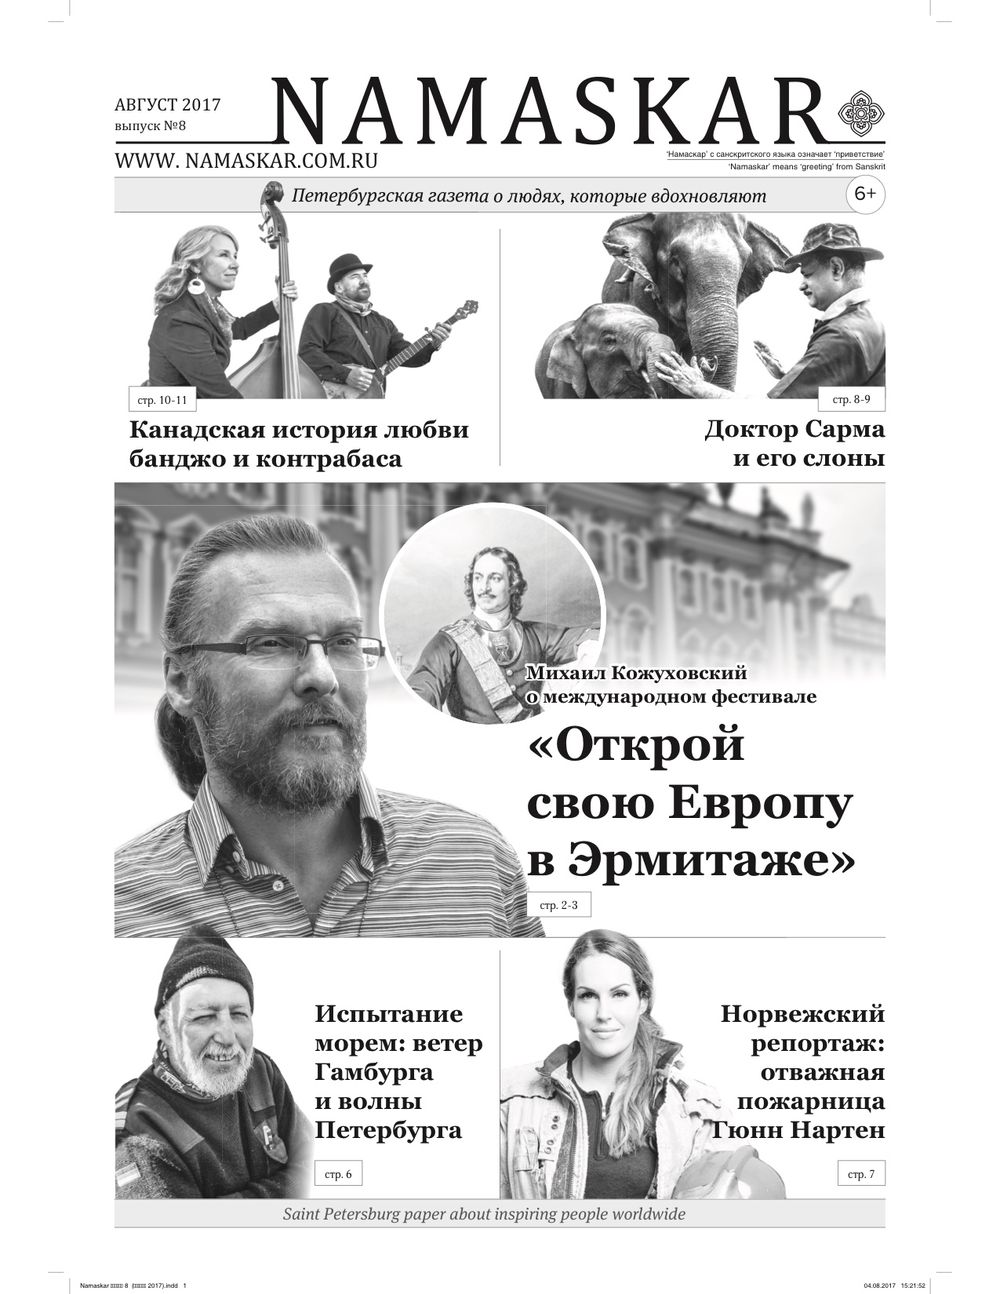 Anyone speak Russian? The whole article is on the bottom:)